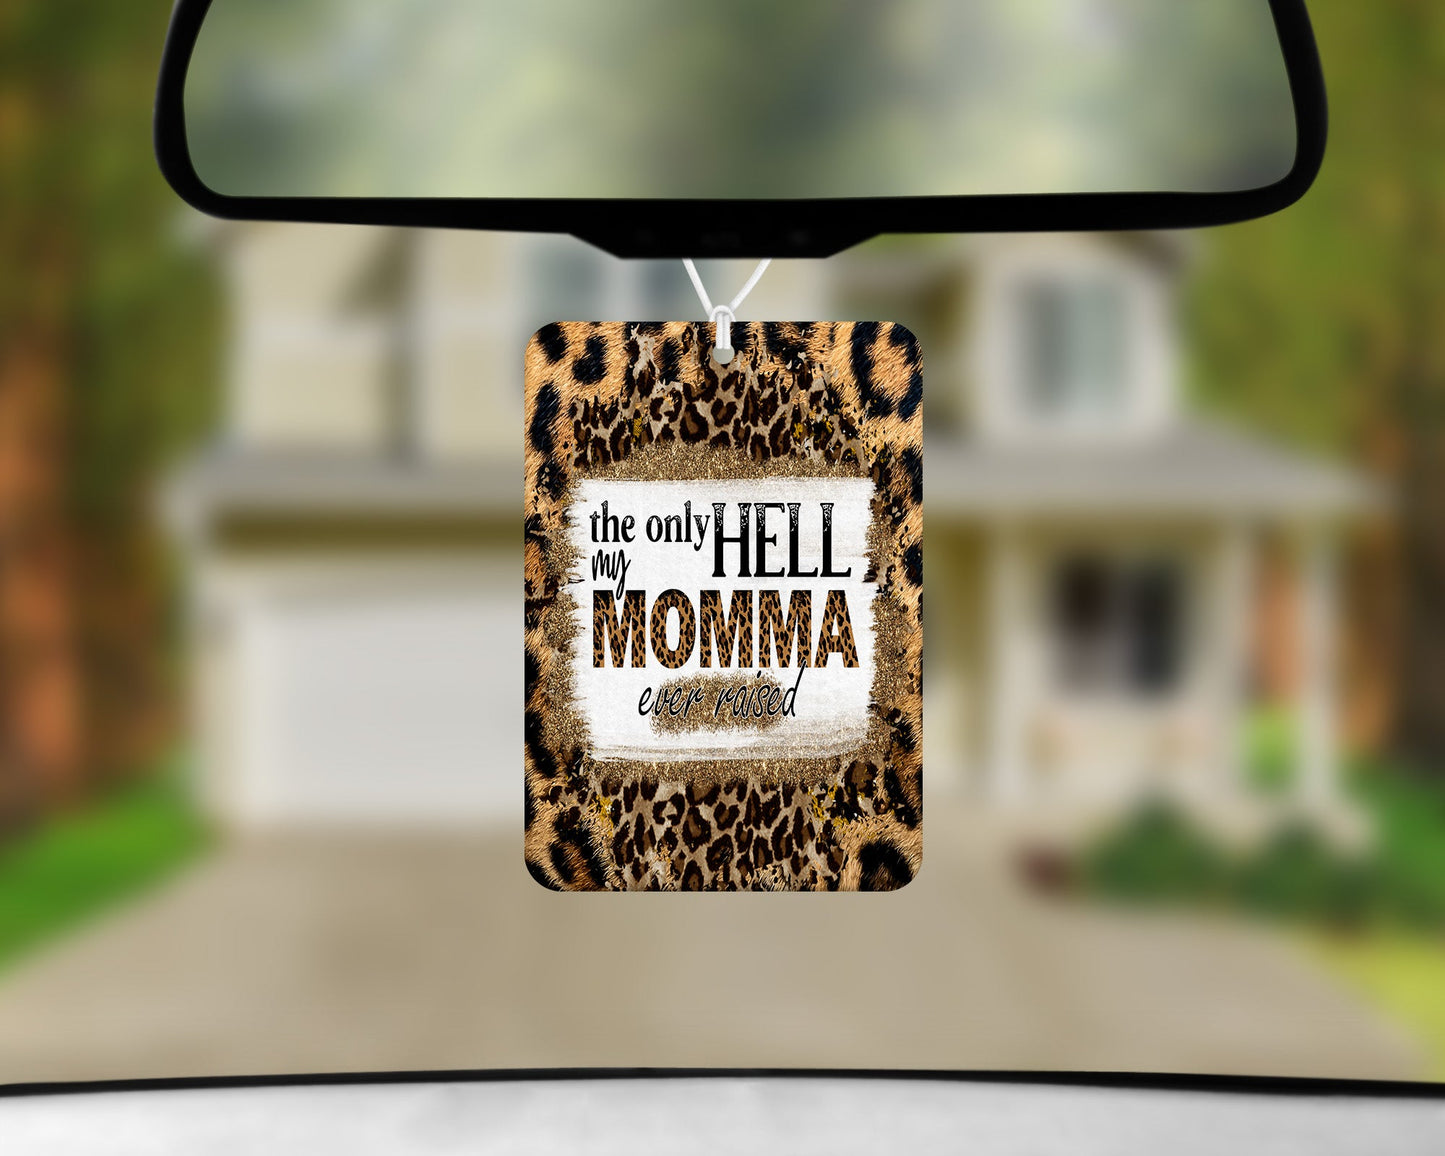 The Only Hell My Momma Ever Raised|Freshie|Includes Scent Bottle - Vehicle Air Freshener